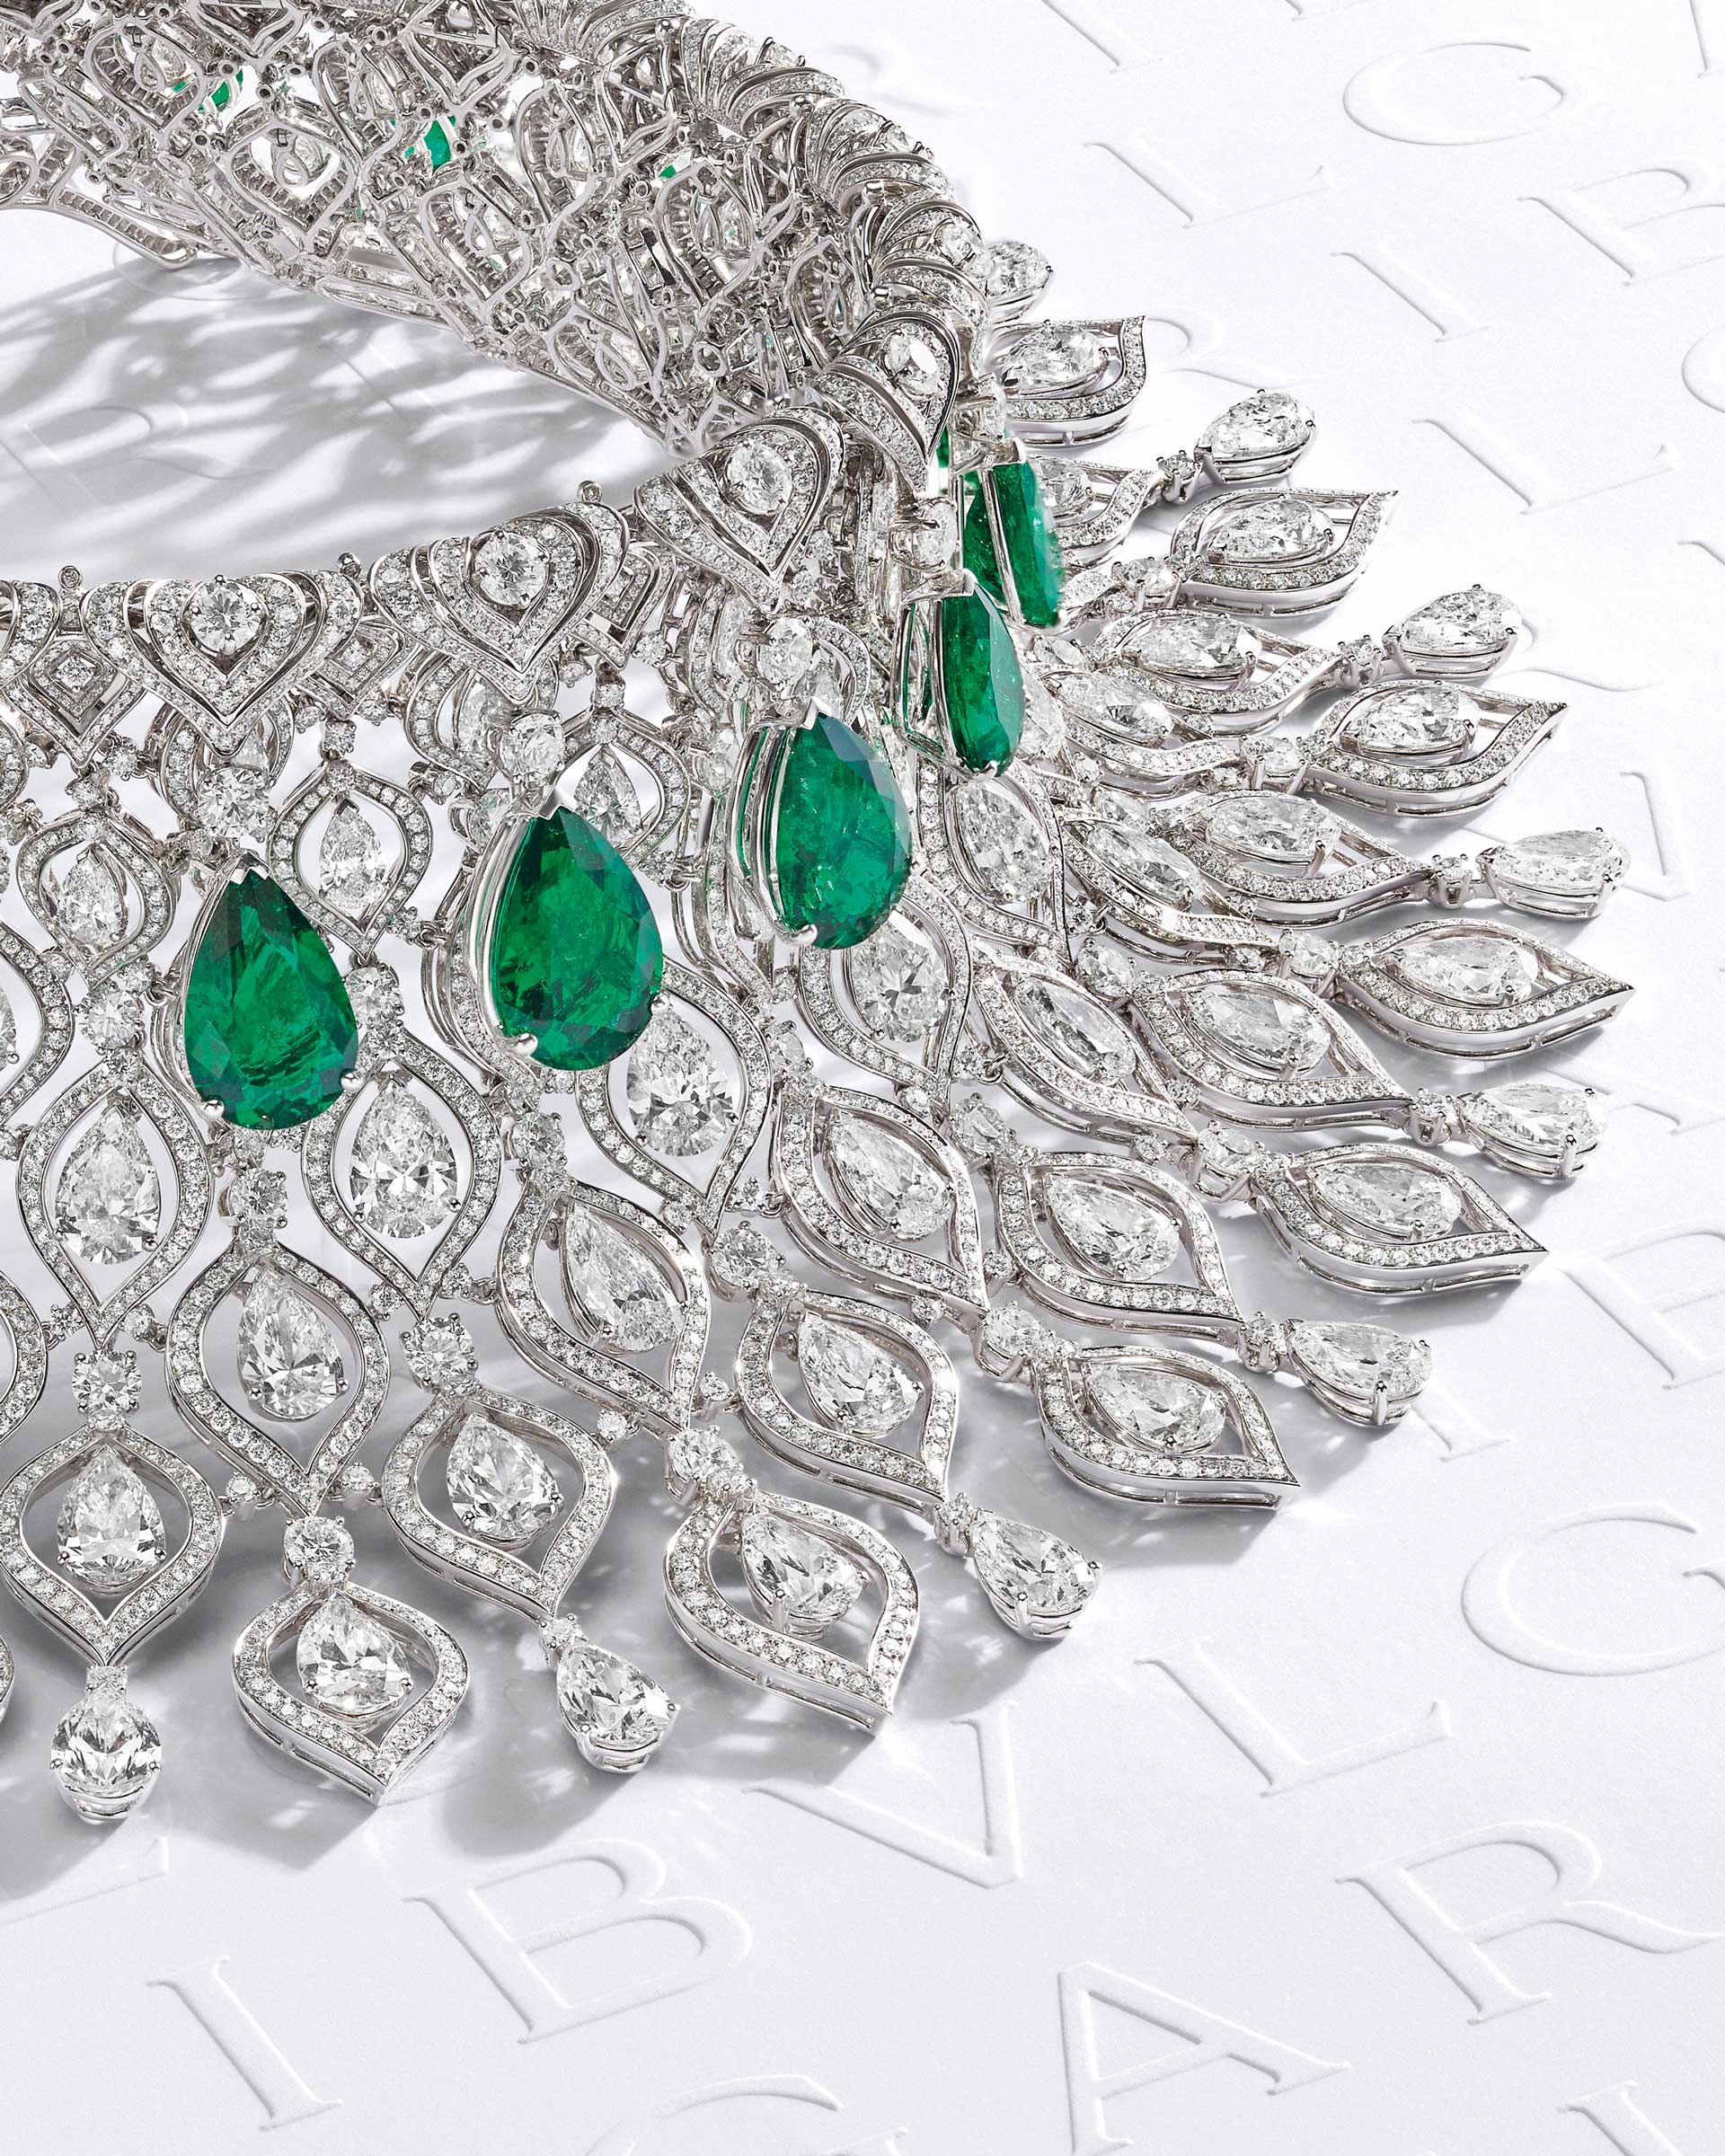 Bulgari's New High Jewelry Collection Is an Ode to the Garden of